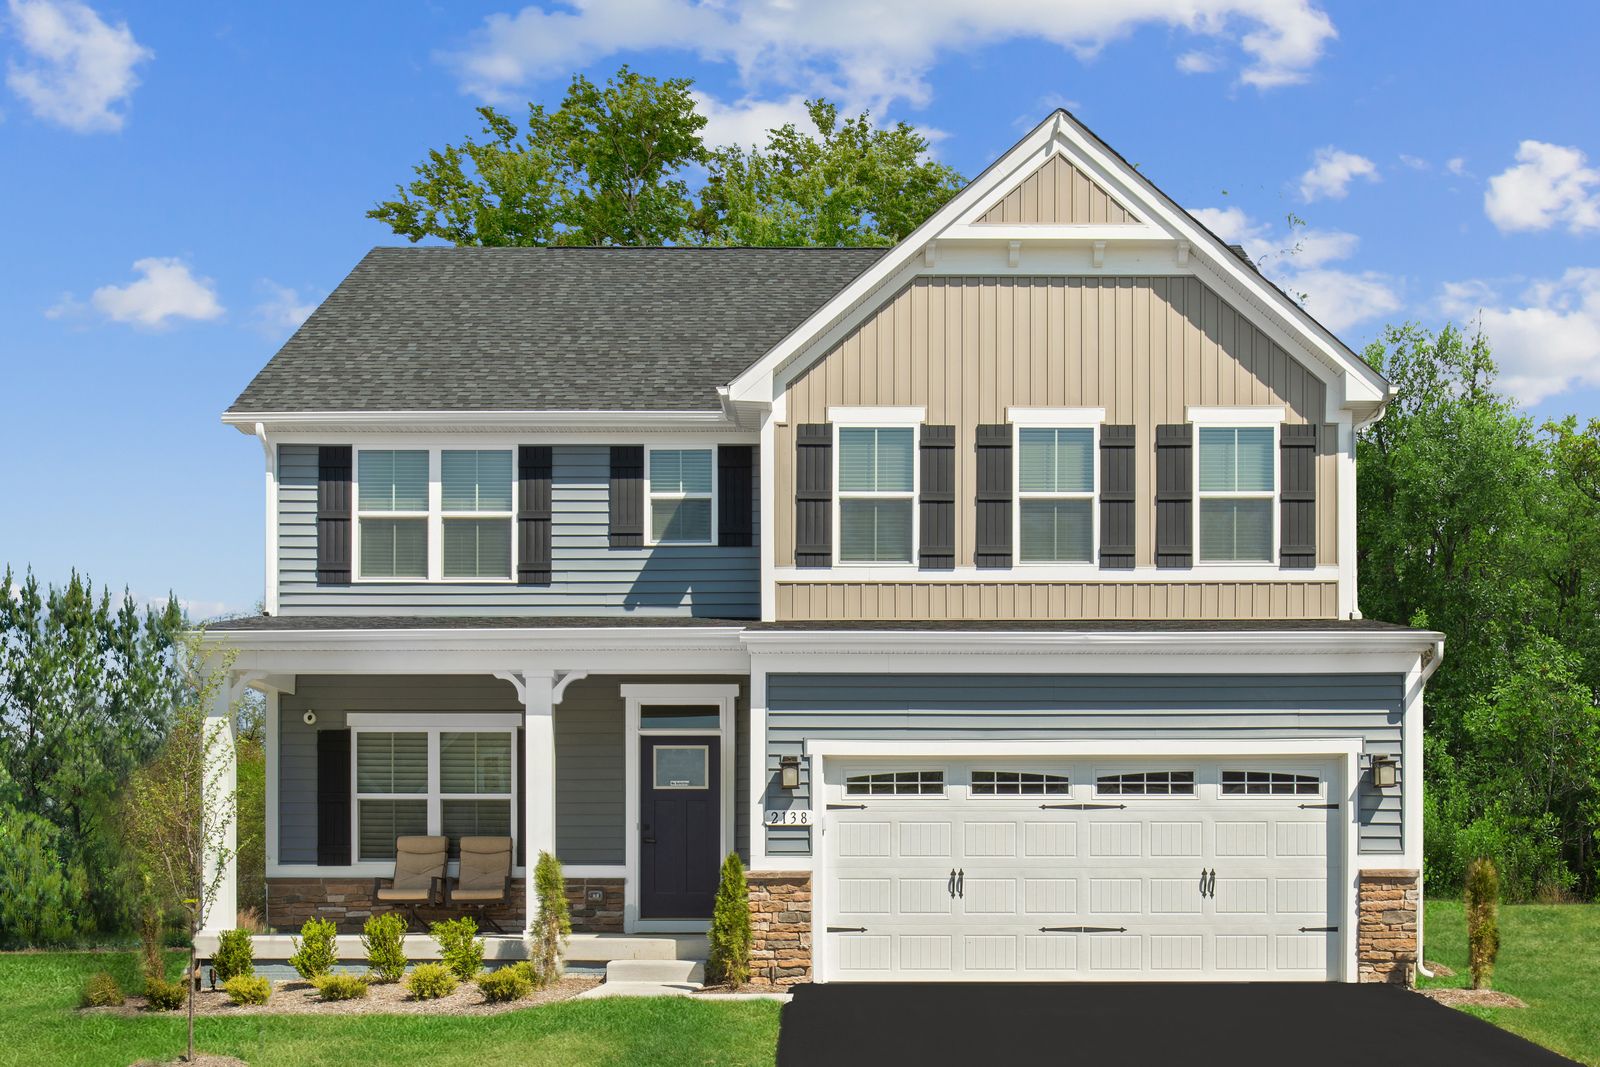 welcome to blackburn - only 2 homesites remaining!